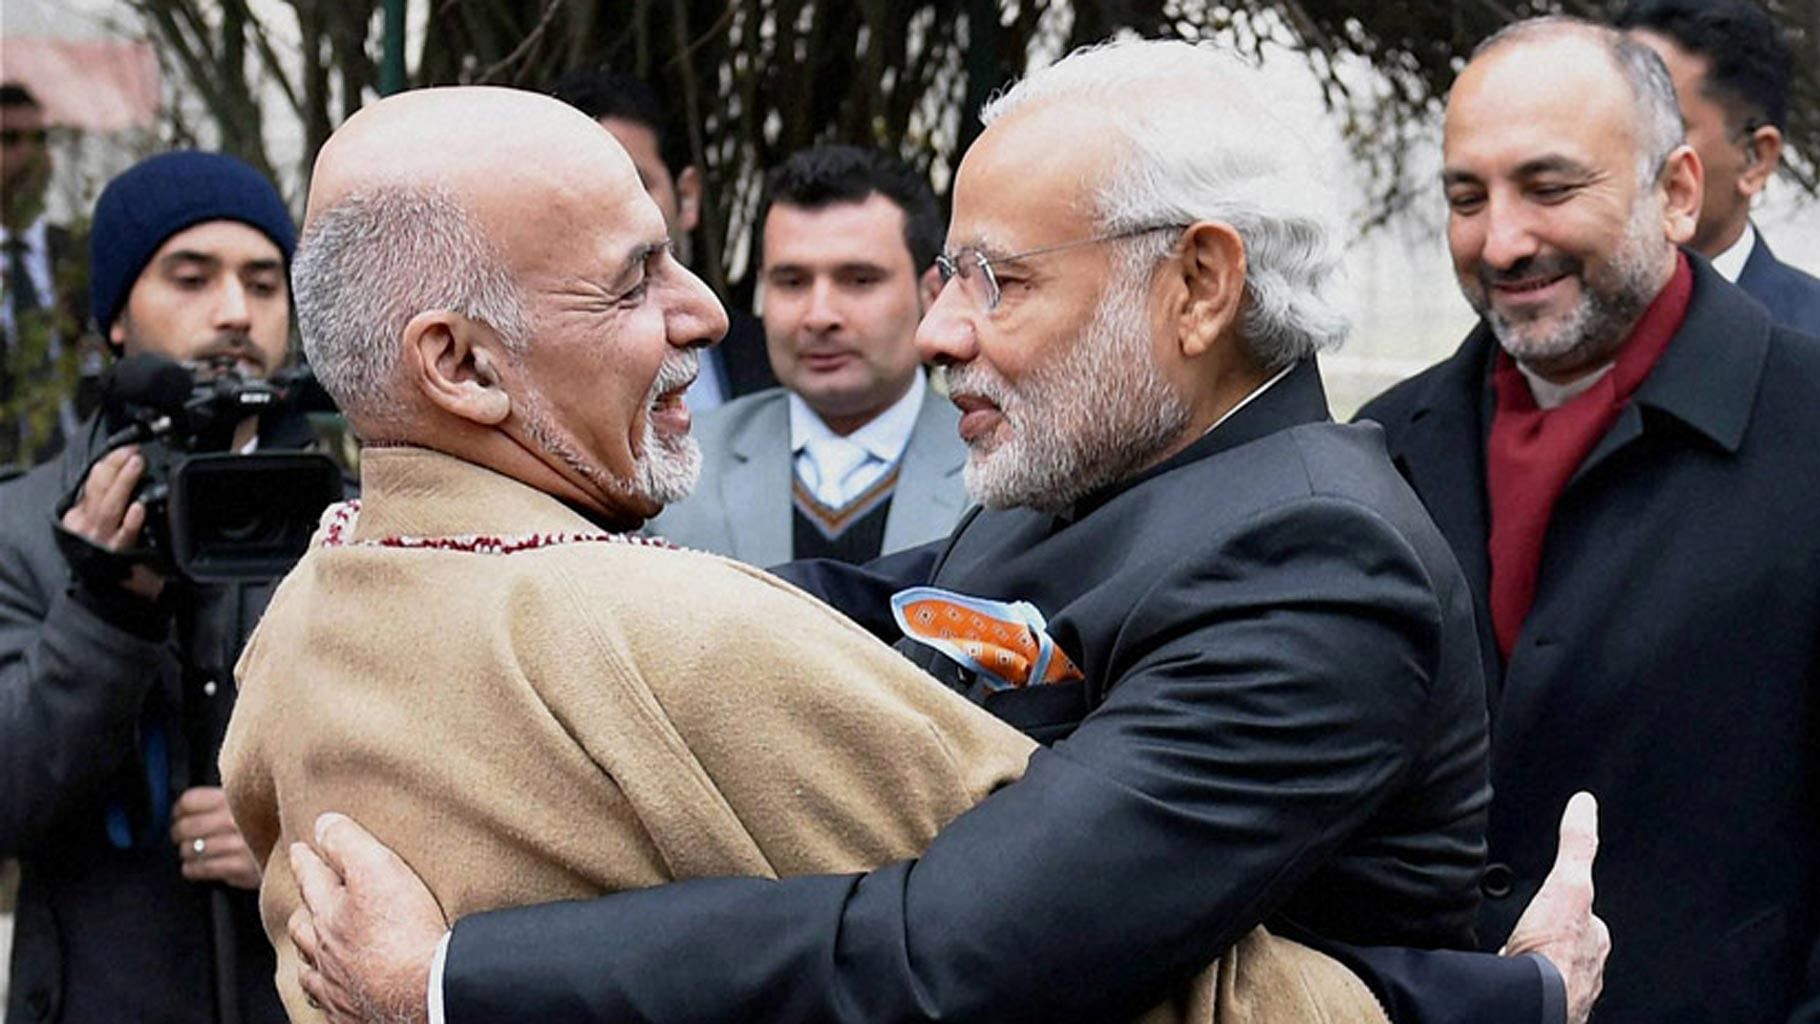 Prime Minister Narendra Modi and Afghan President Ashraf Ghani hug each other during a welcome ceremony at President Palace in Kabul on Friday. (Photo: PTI)